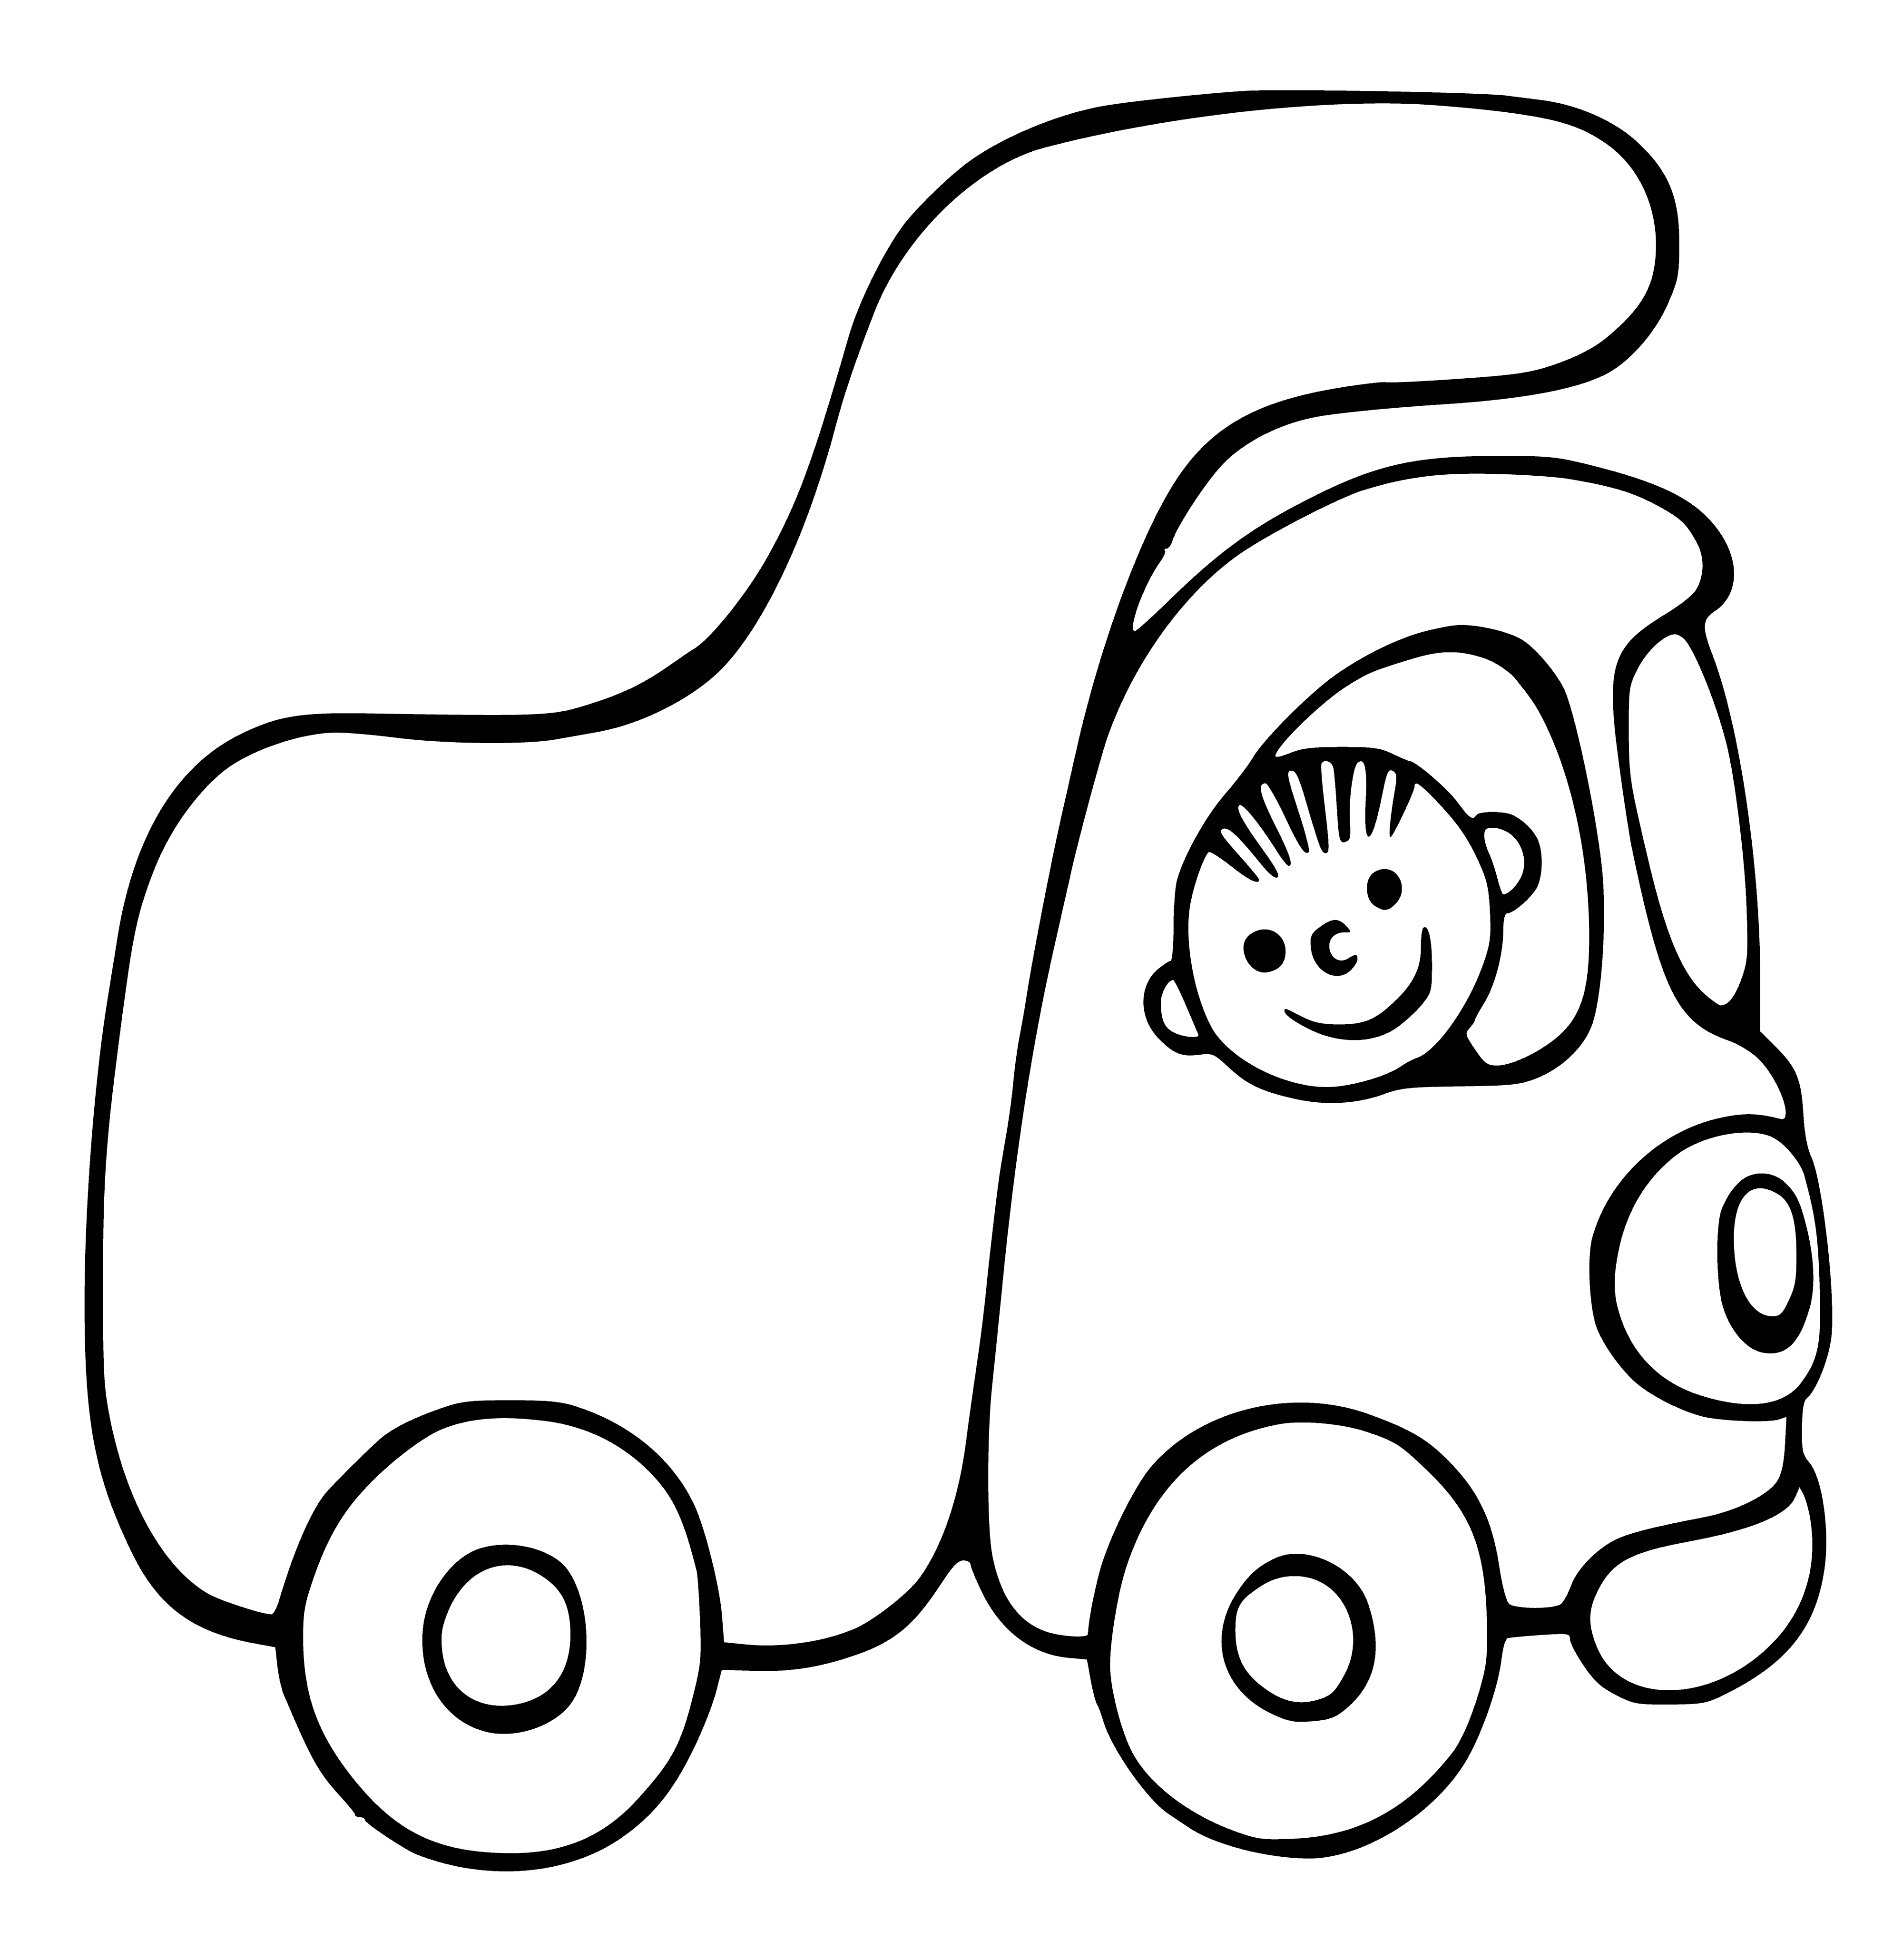 Dump truck coloring page